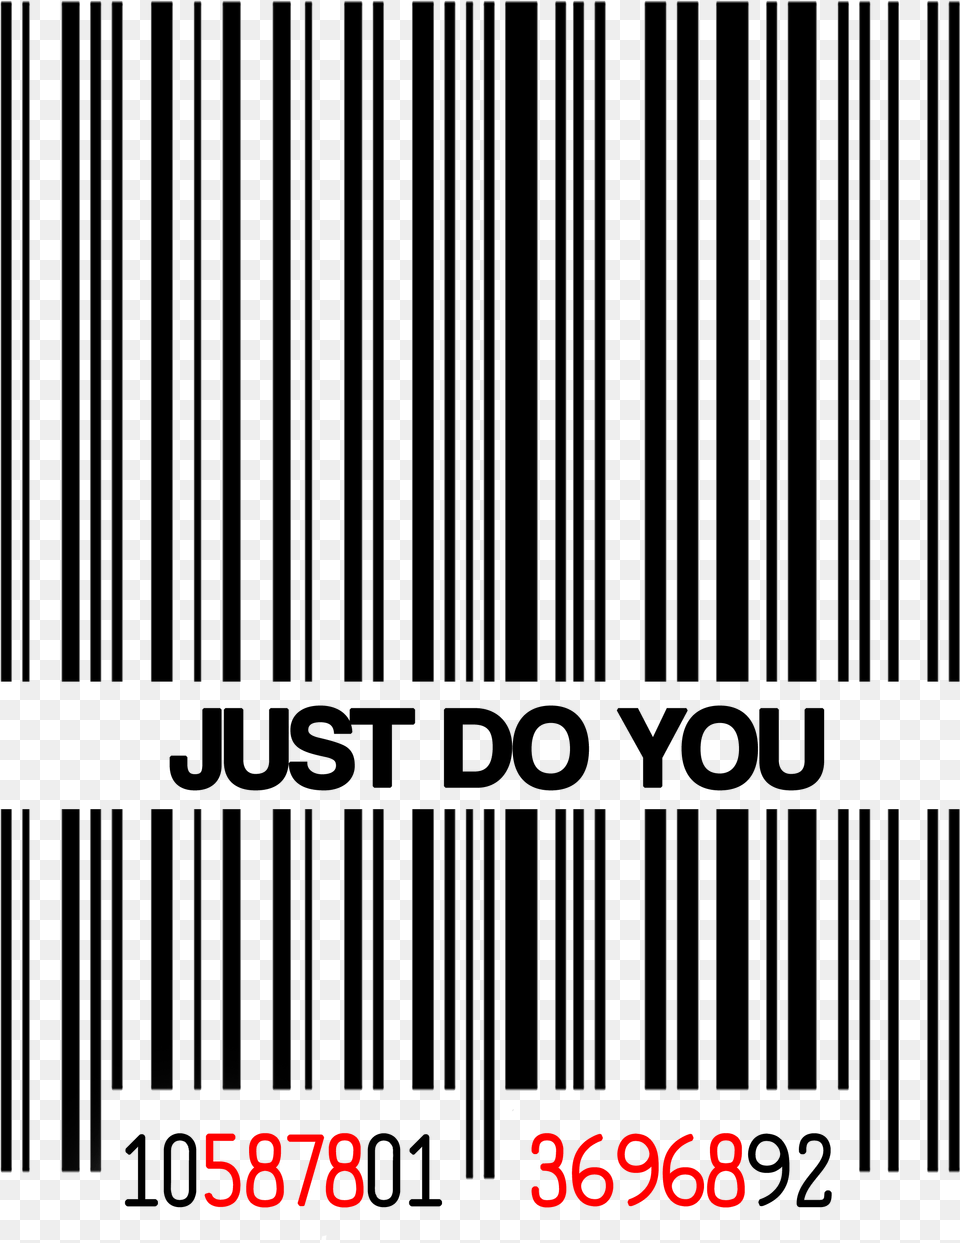 Nike Barcode Download Nike Barcodes, Architecture, Building Png Image